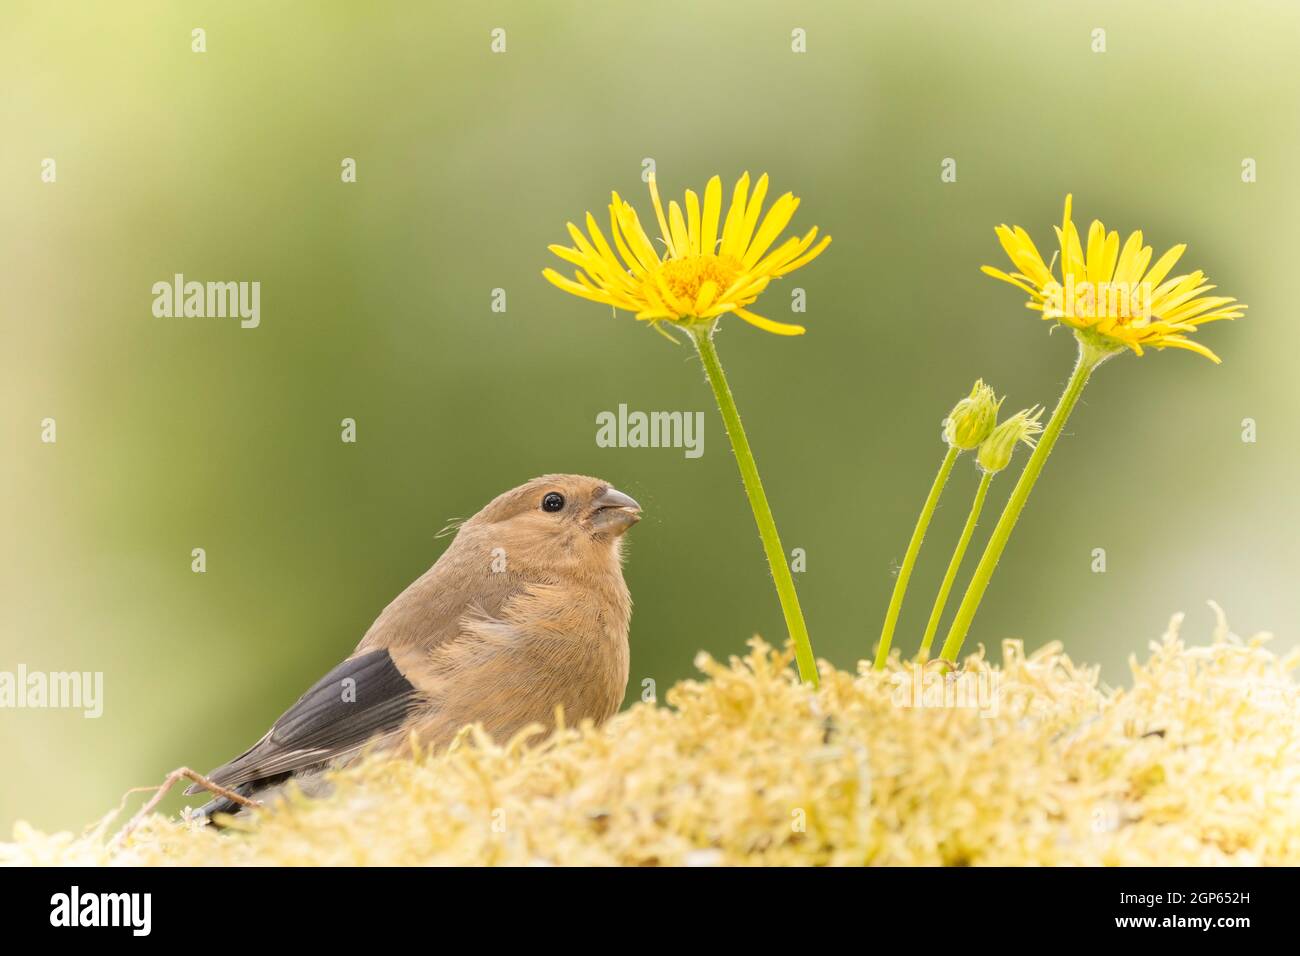 profile and close up of  a young bullfinch in front and in the middle of yellow flowers Stock Photo